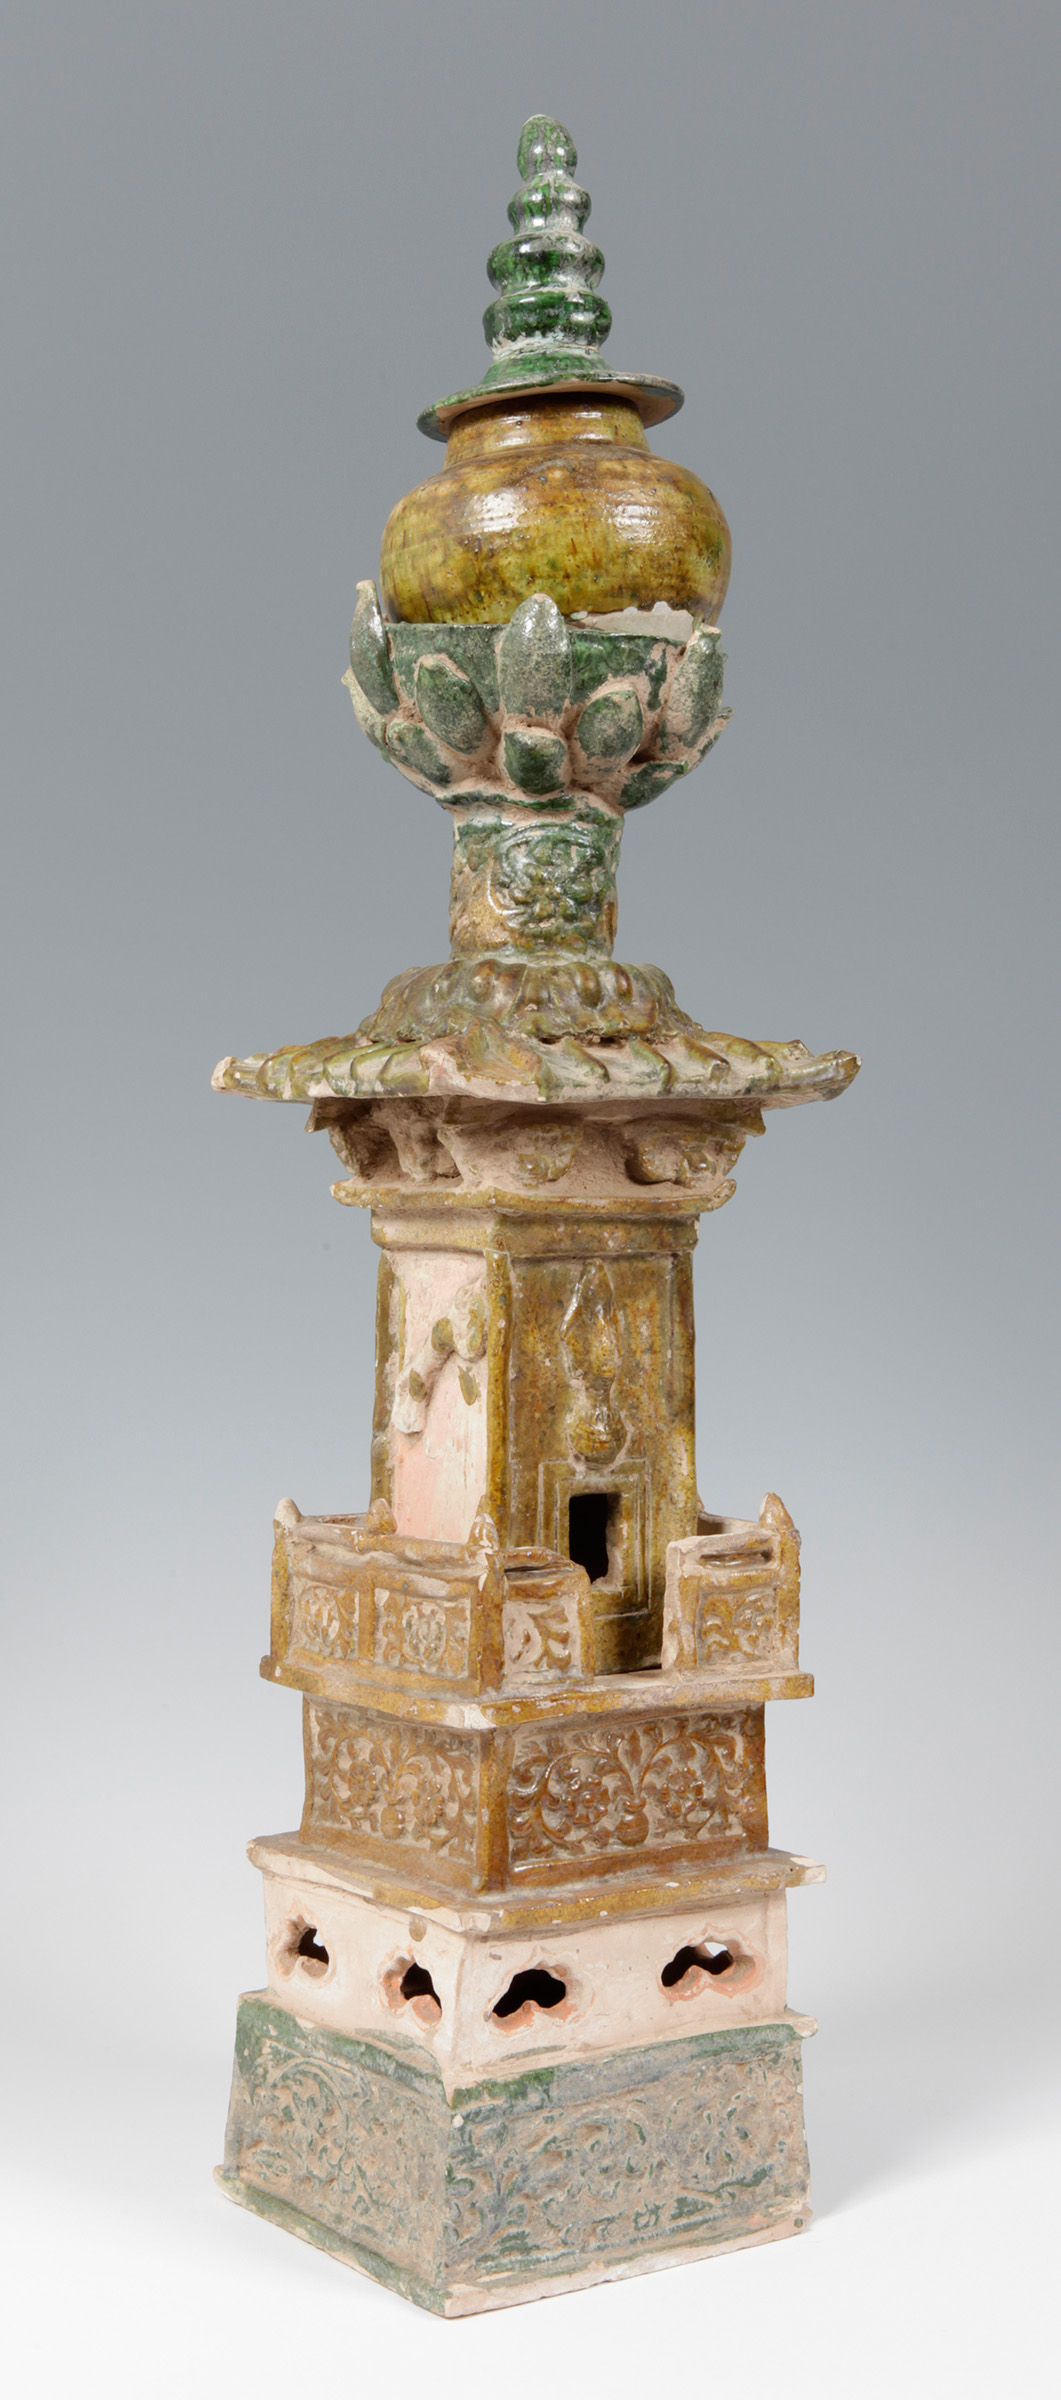 Funerary tower; China, Nanjing, Ming dynasty, 1368-644.Sancai glazed pottery, consisting of four